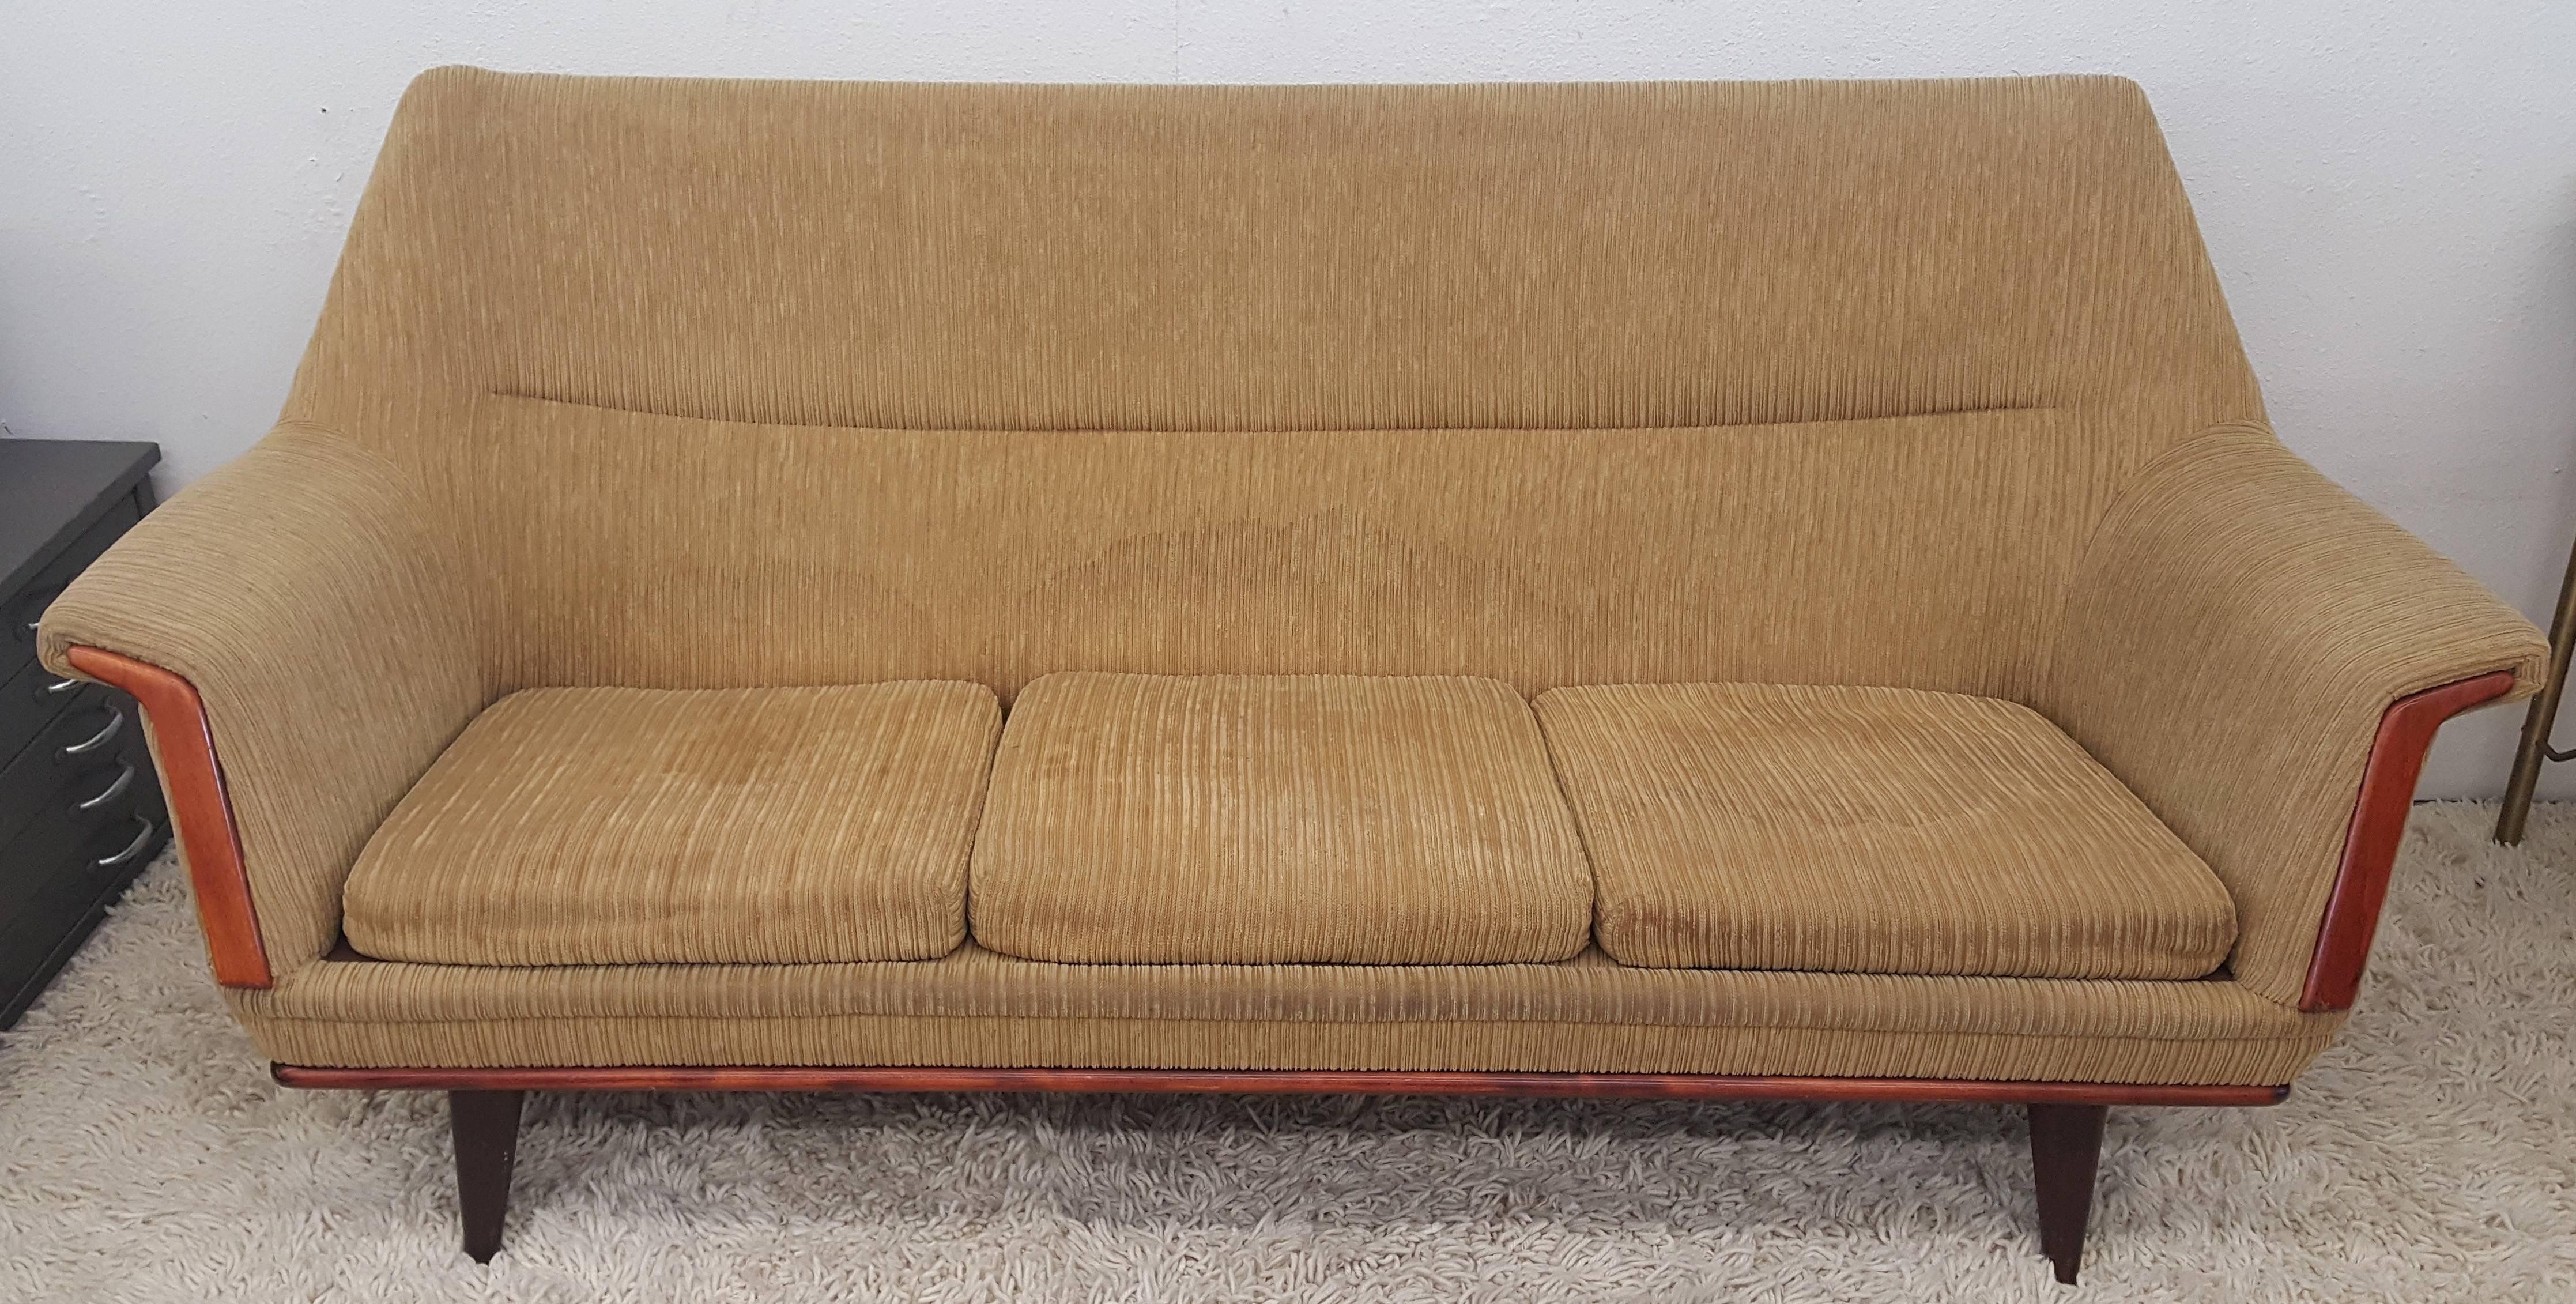 1950s sofa bed